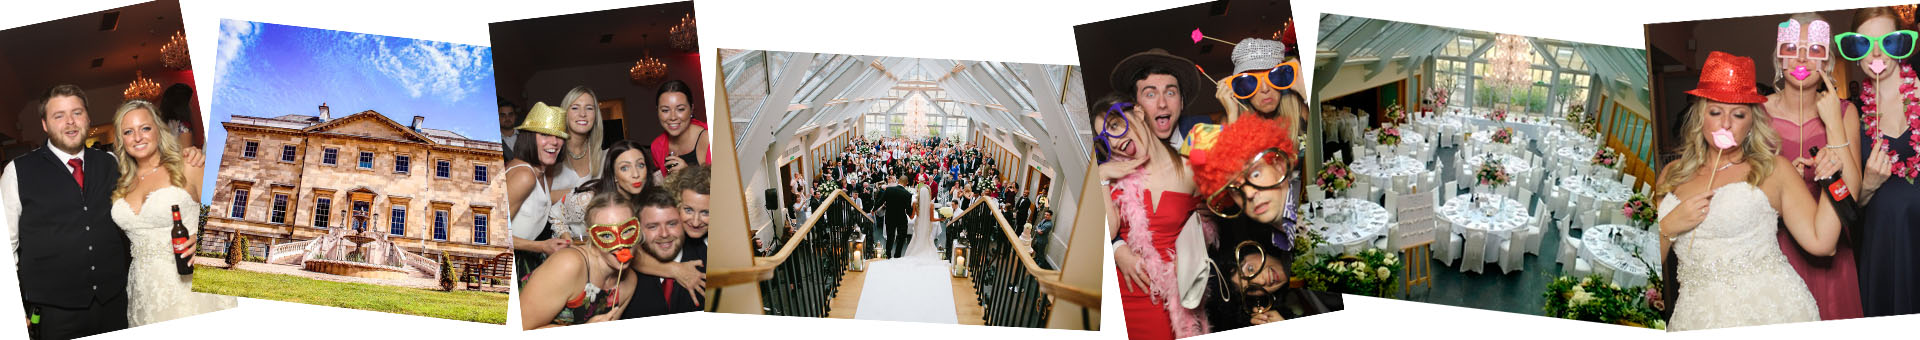 Images of photo booth hire at Botleys Mansion, Surrey